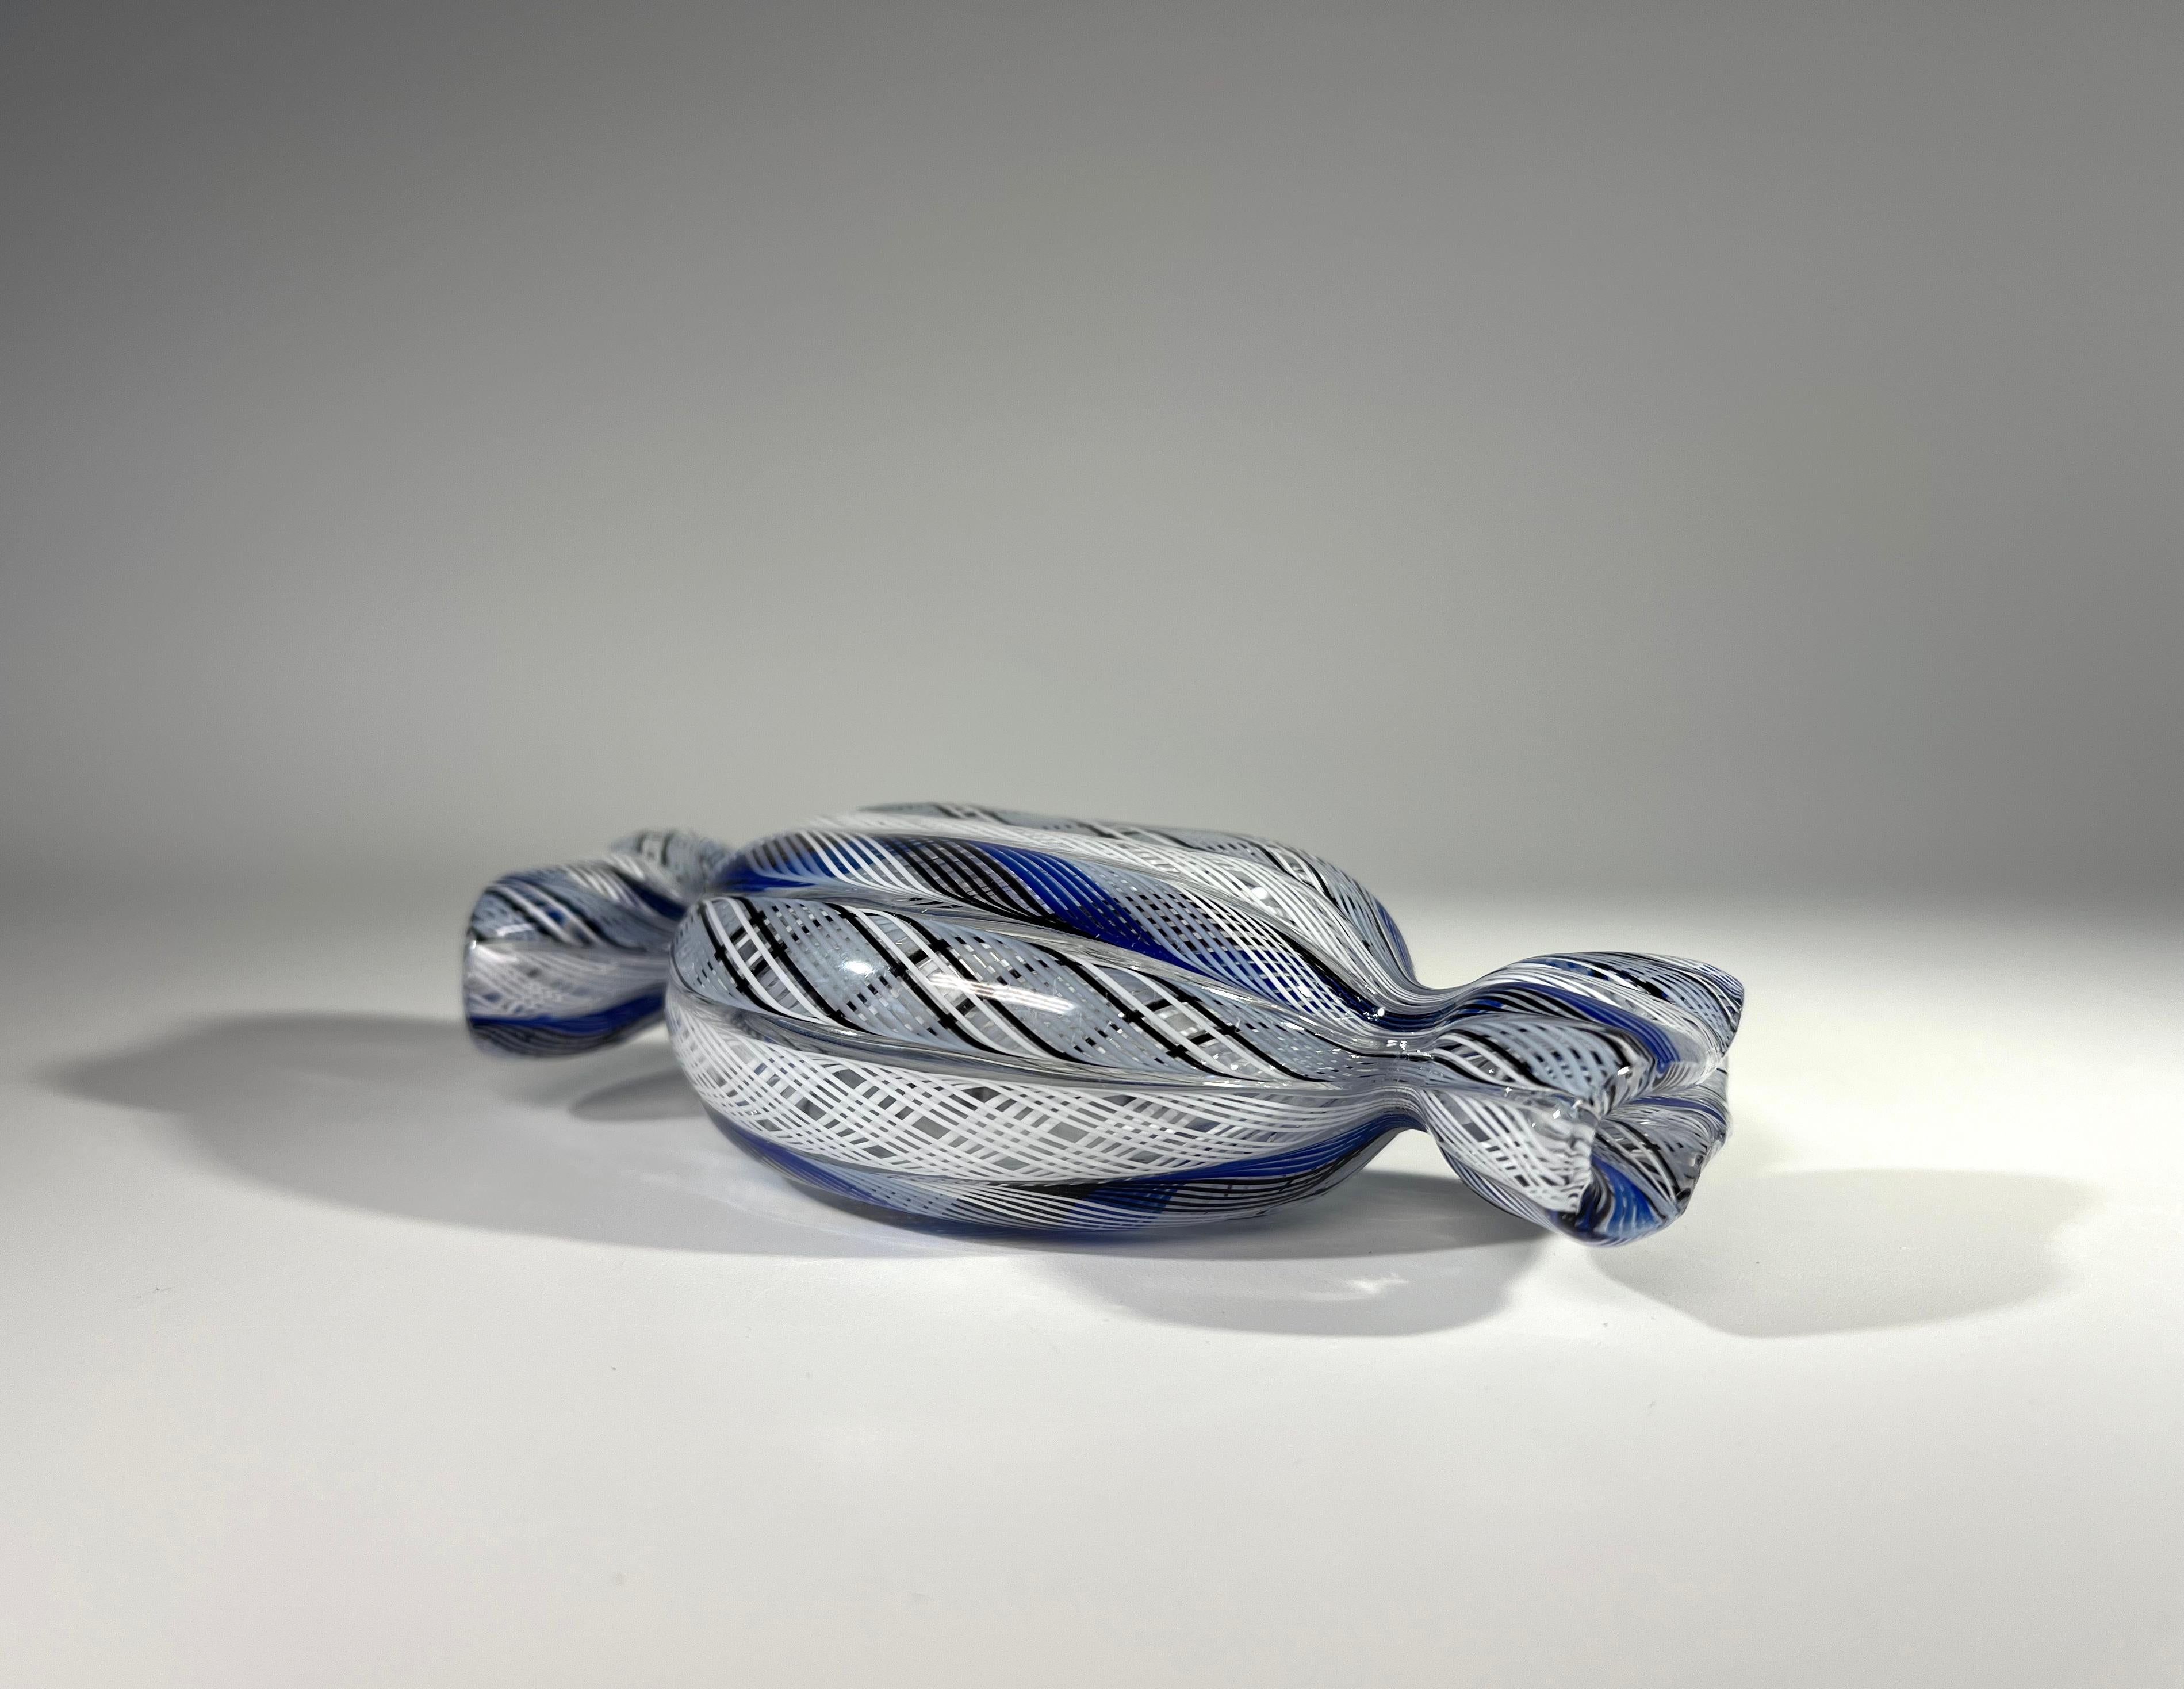 Incredibly intricate blue, black and white Zanfirico canes are worked to create a delicious hand blown glass sweetie 
Crafted by the renowned glass artist, Mike Hunter of Twists Studio in Scotland
Has original Twists studio label
Circa